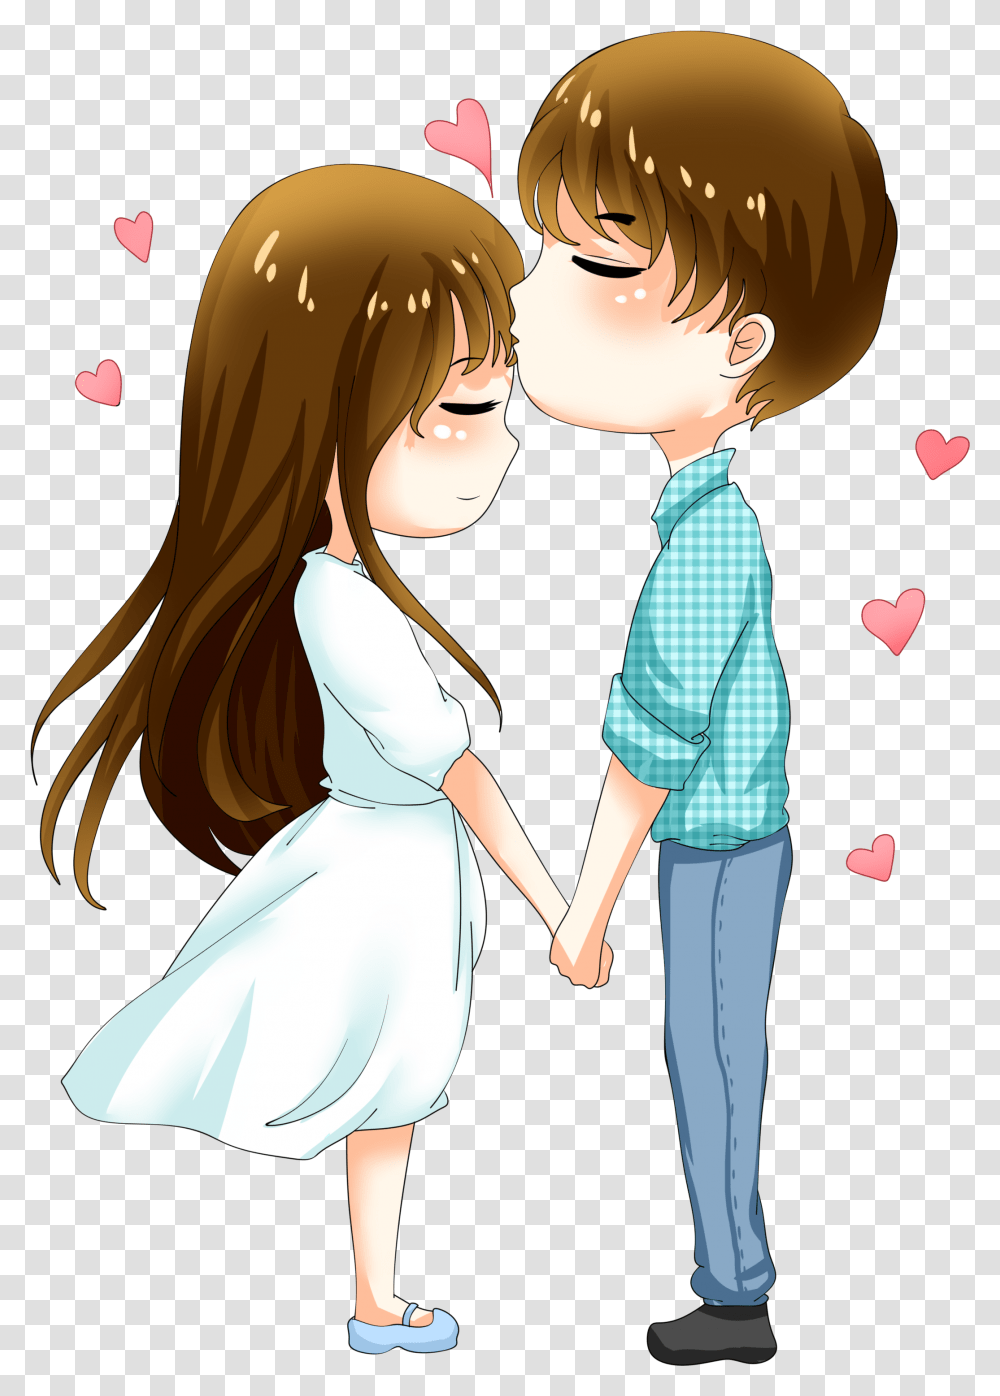 Cute Couple Couple Images Cartoon Hd Person Hand Holding Hands Dating Transparent Png Pngset Com